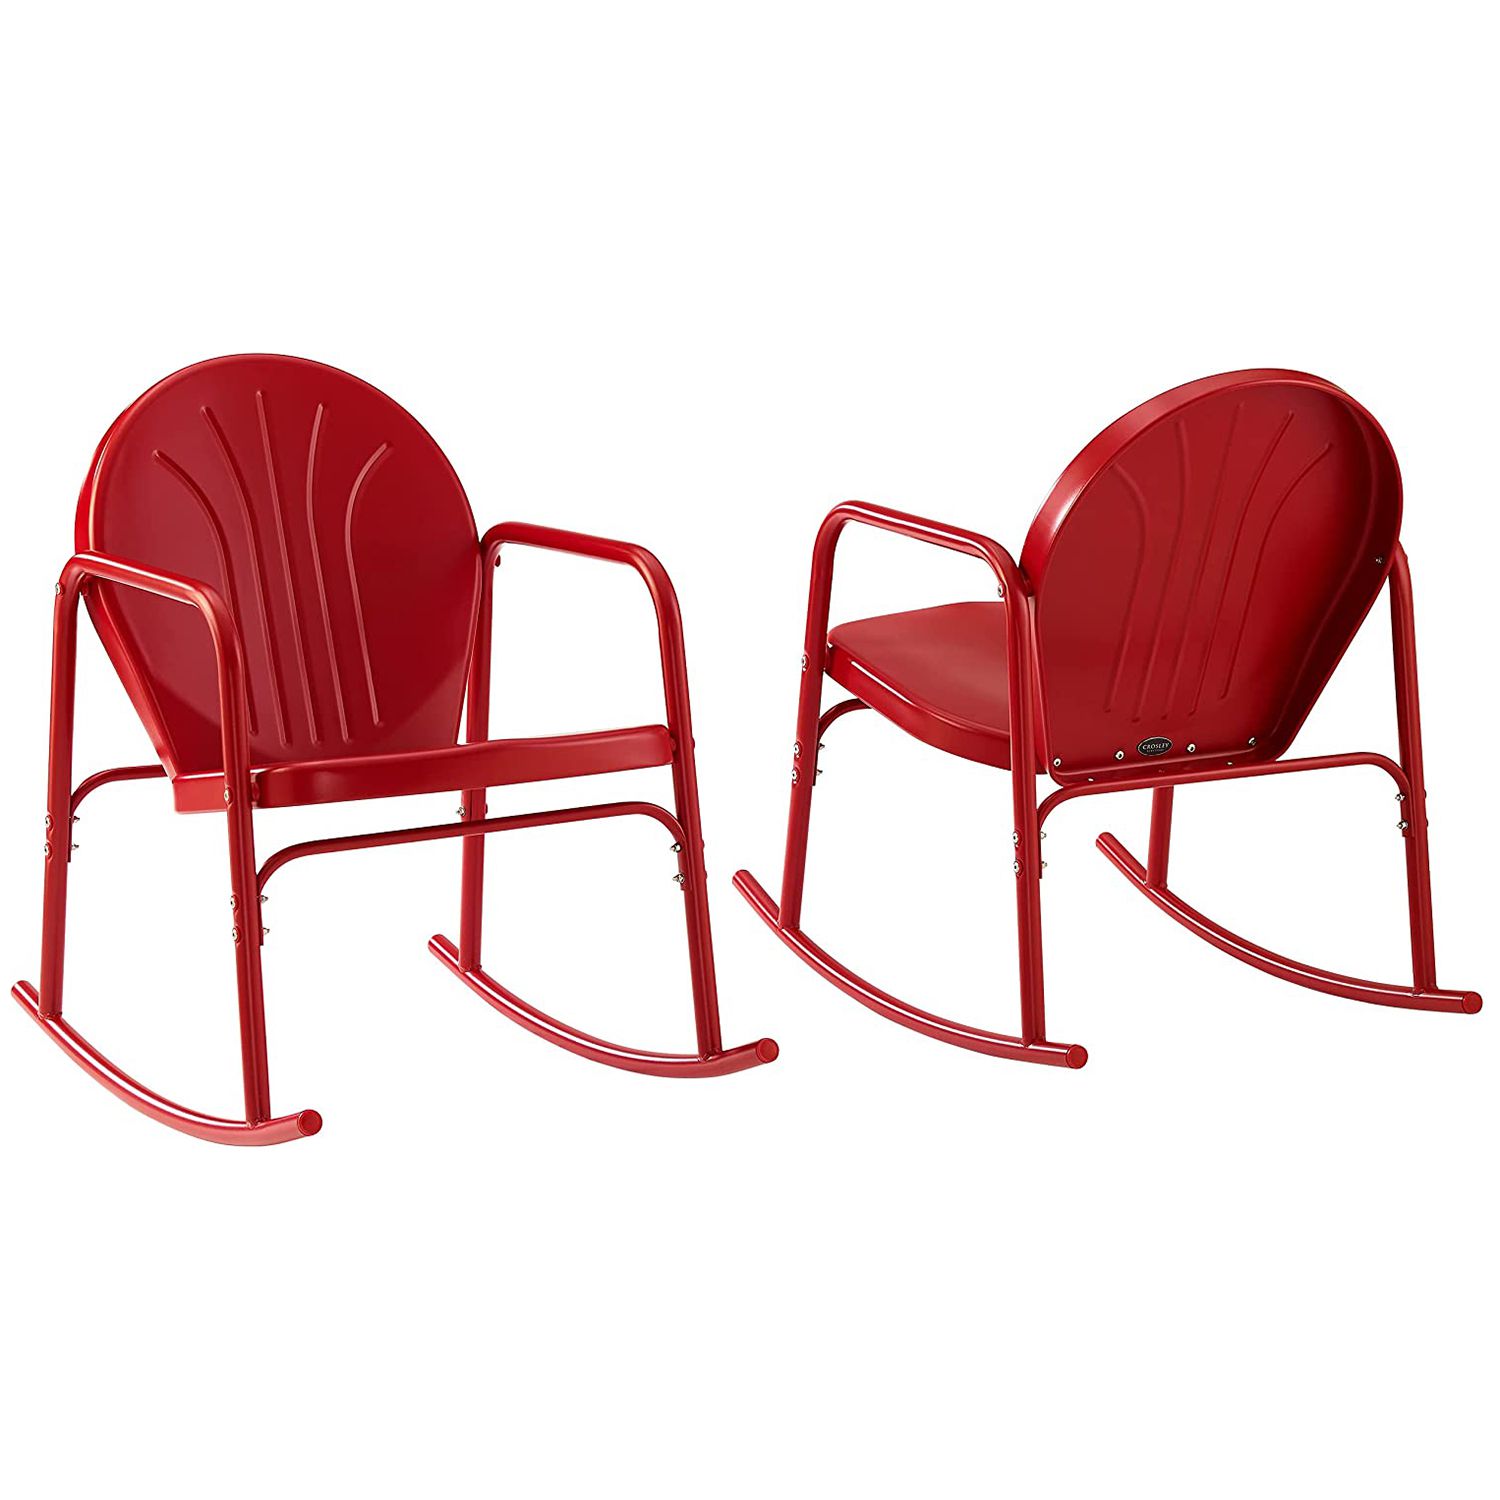 Roundup of Prime Day Patio Furniture Deals